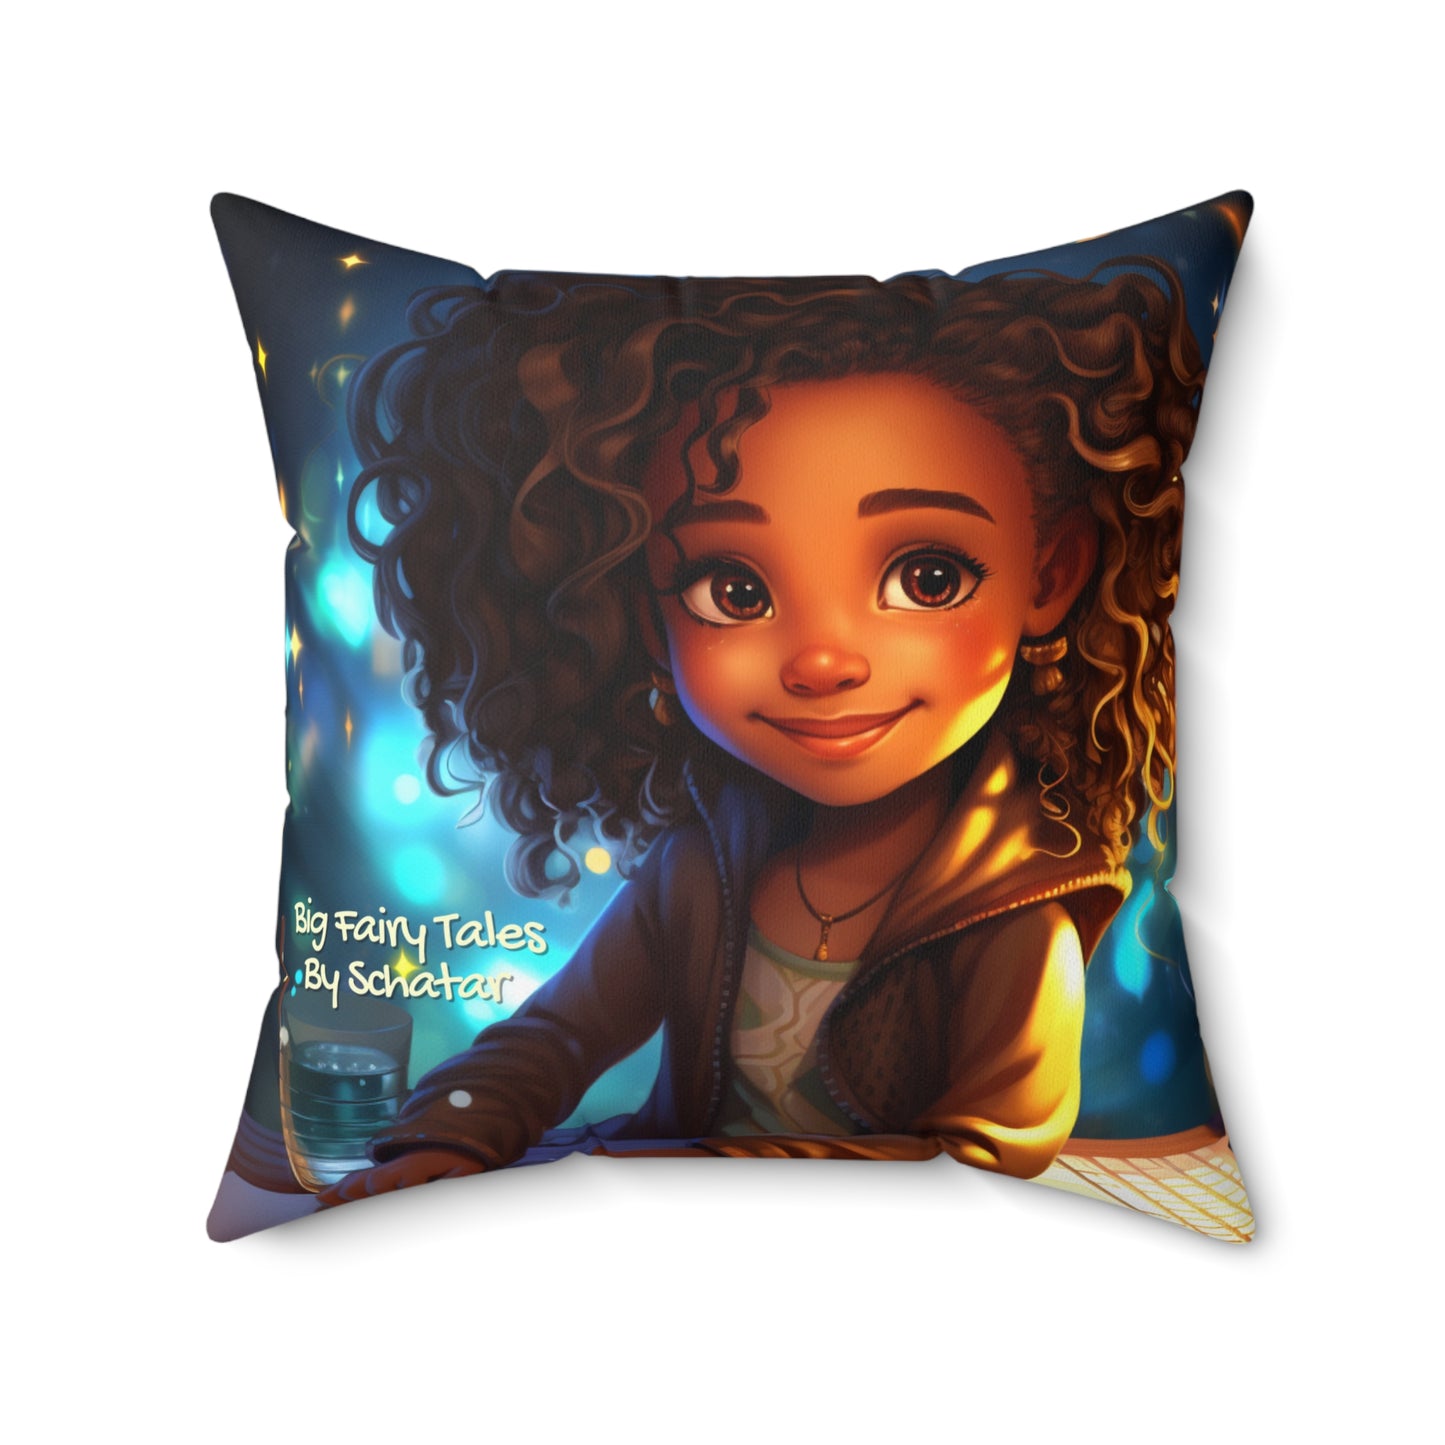 CEO - Big Little Professionals Plush Pillow 22 From Big Fairy Tales By Schatar